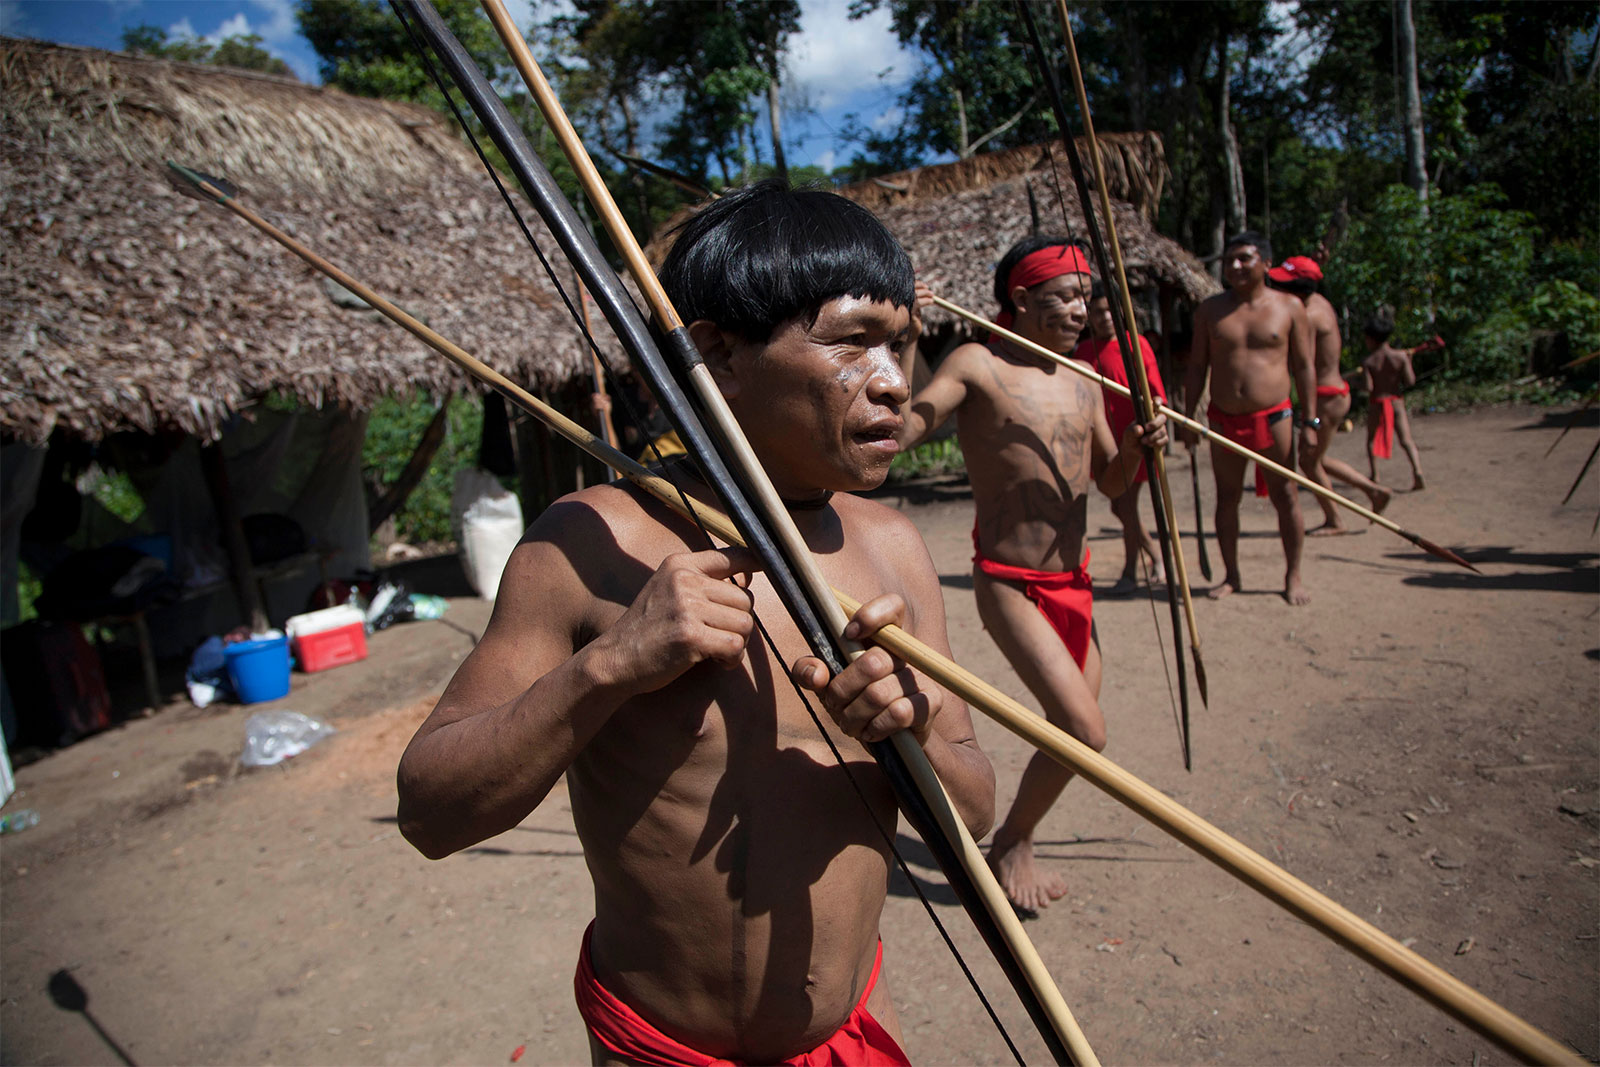 These aborigines, who drink human bone soup